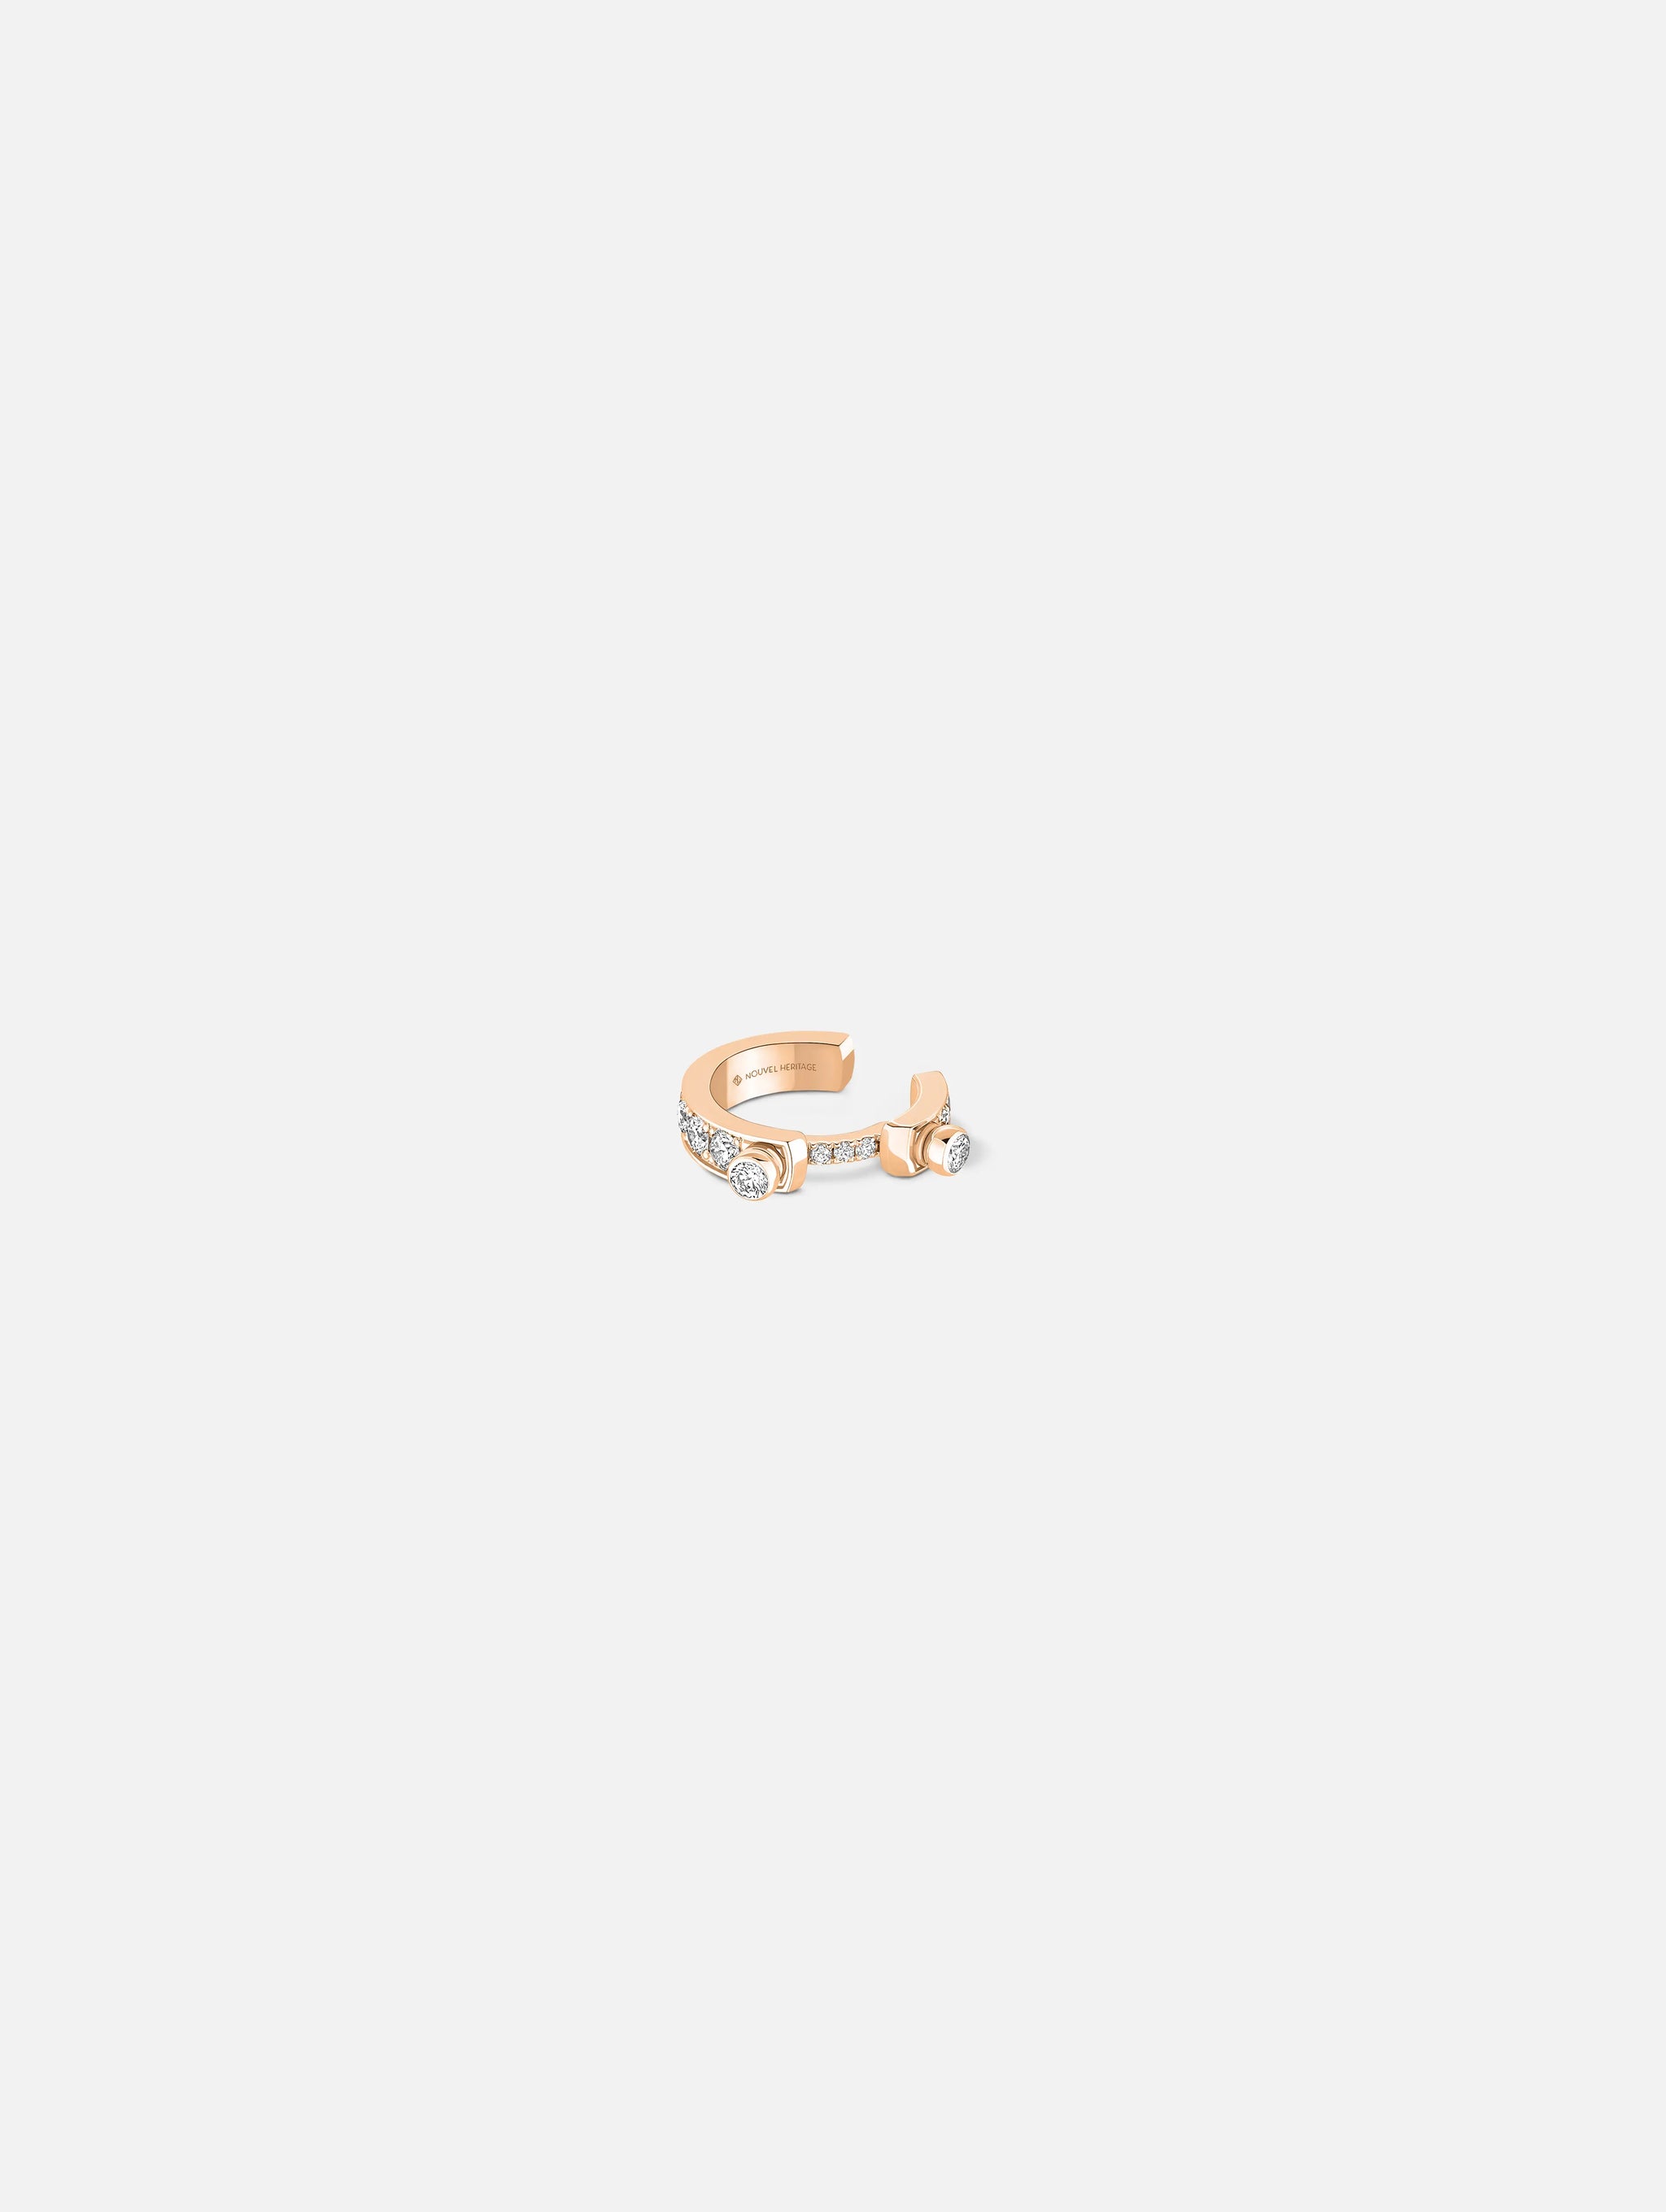 Eternity Tuxedo Ear Cuff in Rose Gold - Nouvel Heritage - Nouvel Heritage